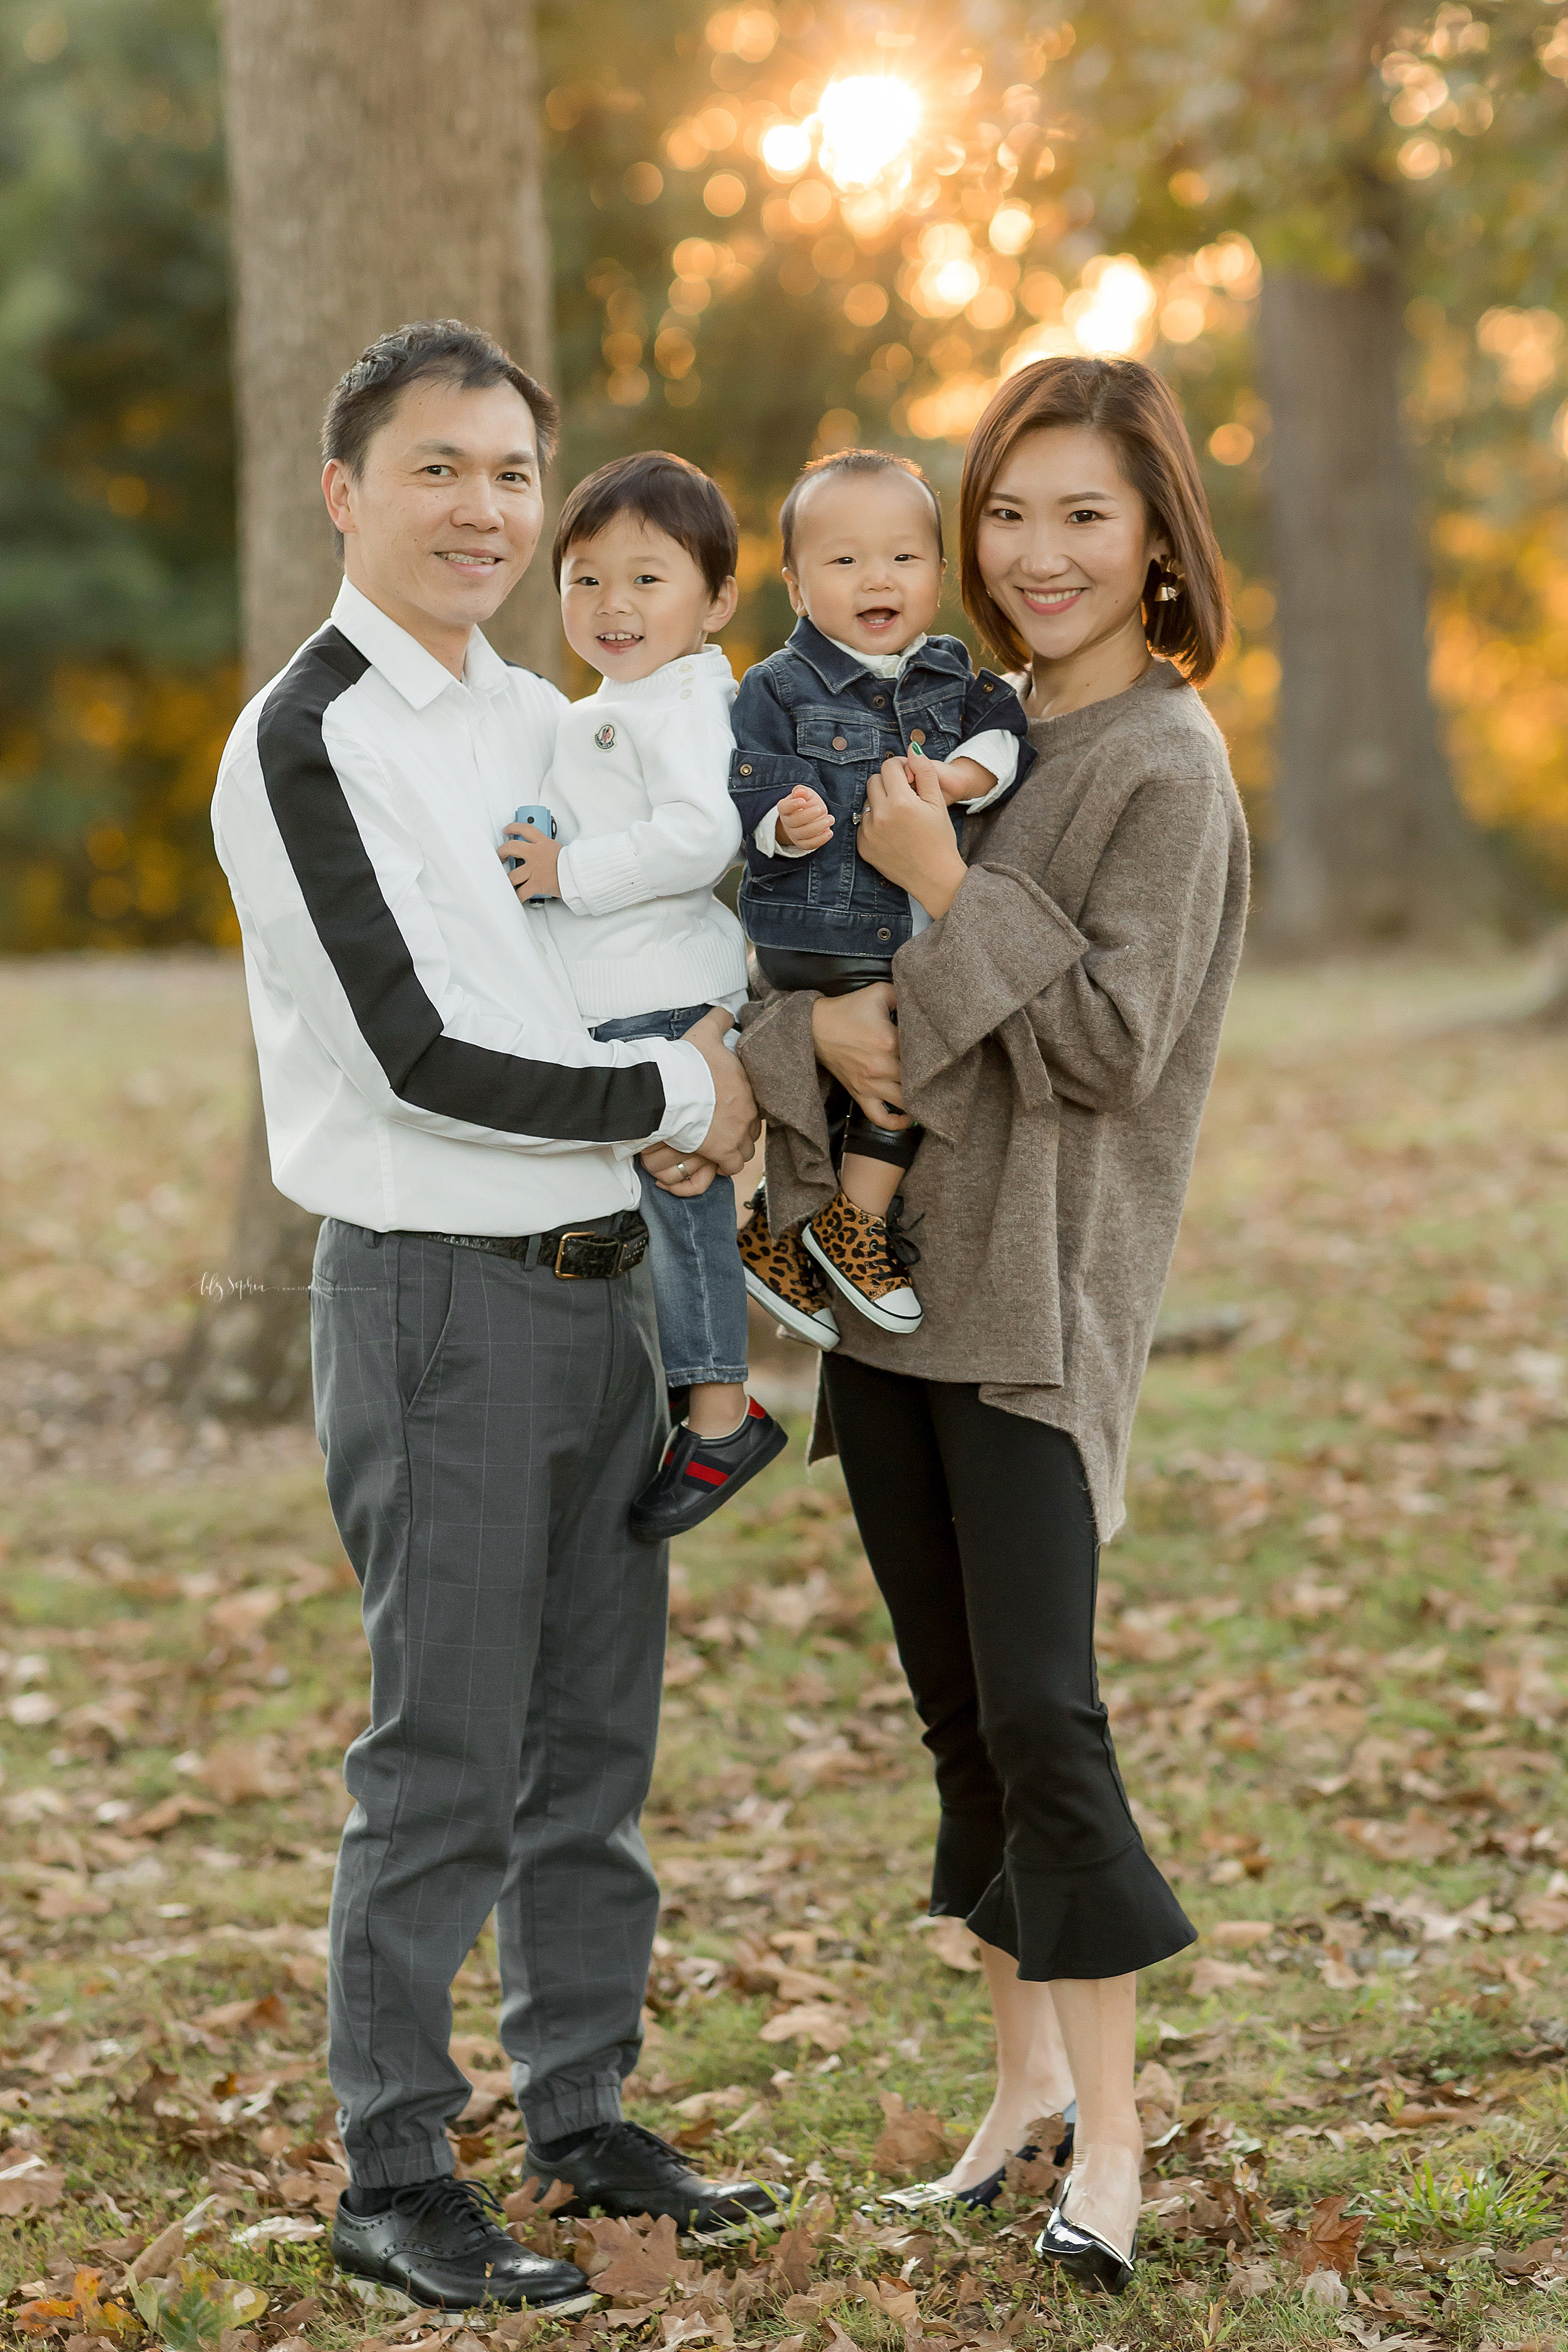 atlanta-buckhead-brookhaven-decatur-lily-sophia-photography--photographer-portraits-grant-park-intown-park-sunset-first-birthday-cake-smash-one-year-old-outdoors-cool-asian-american-family_0089.jpg